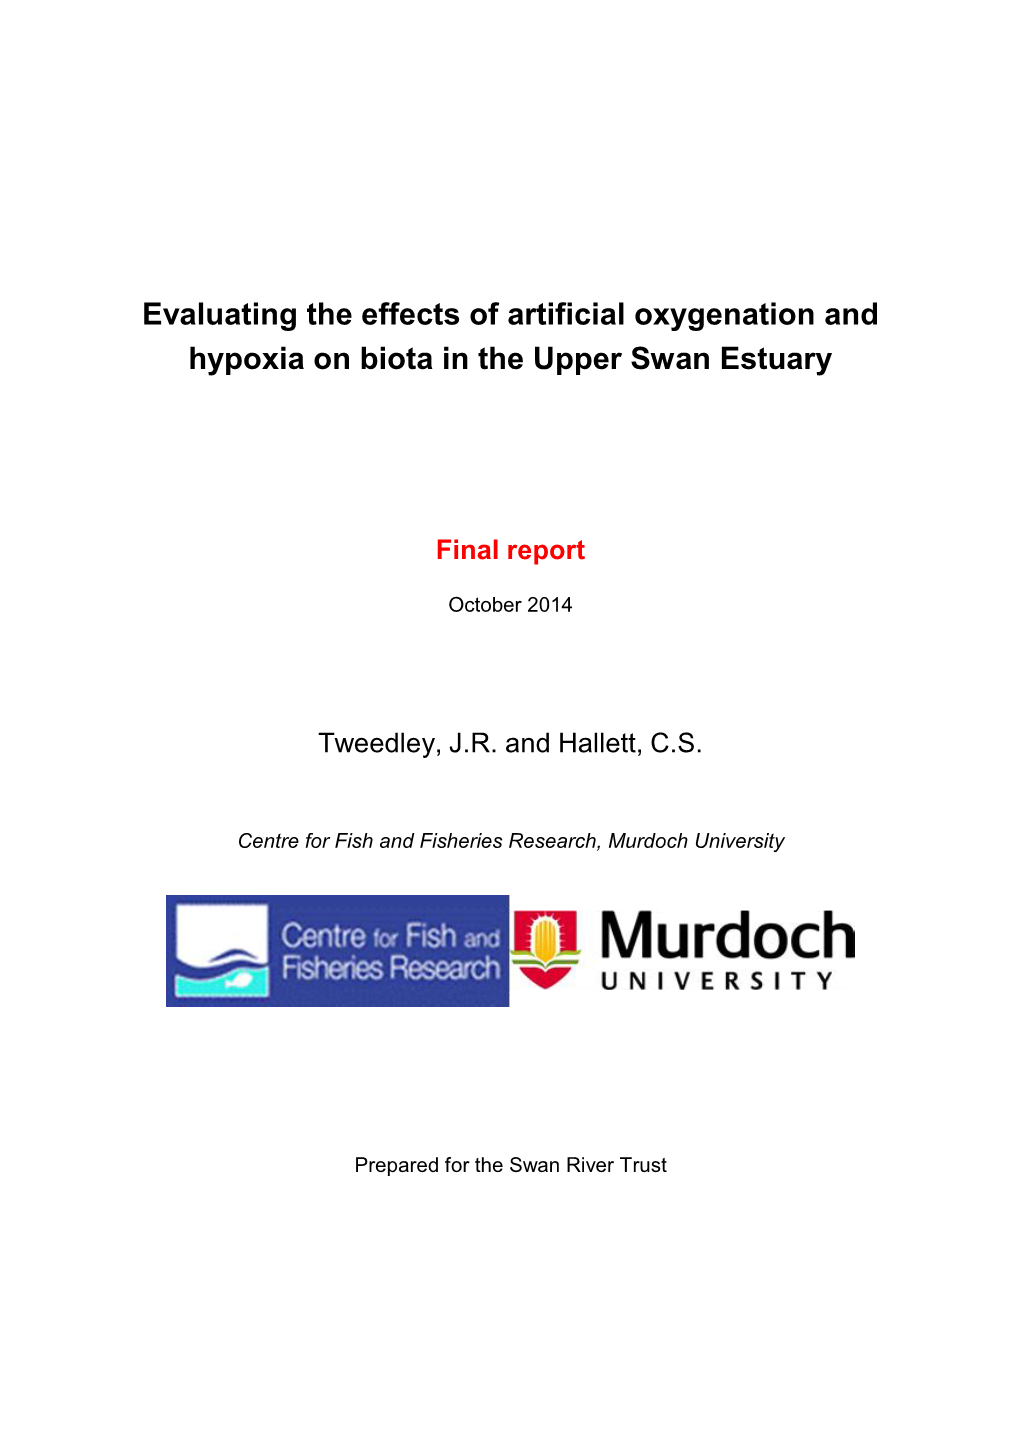 Evaluating the Effects of Artificial Oxygenation and Hypoxia on Biota in the Upper Swan Estuary